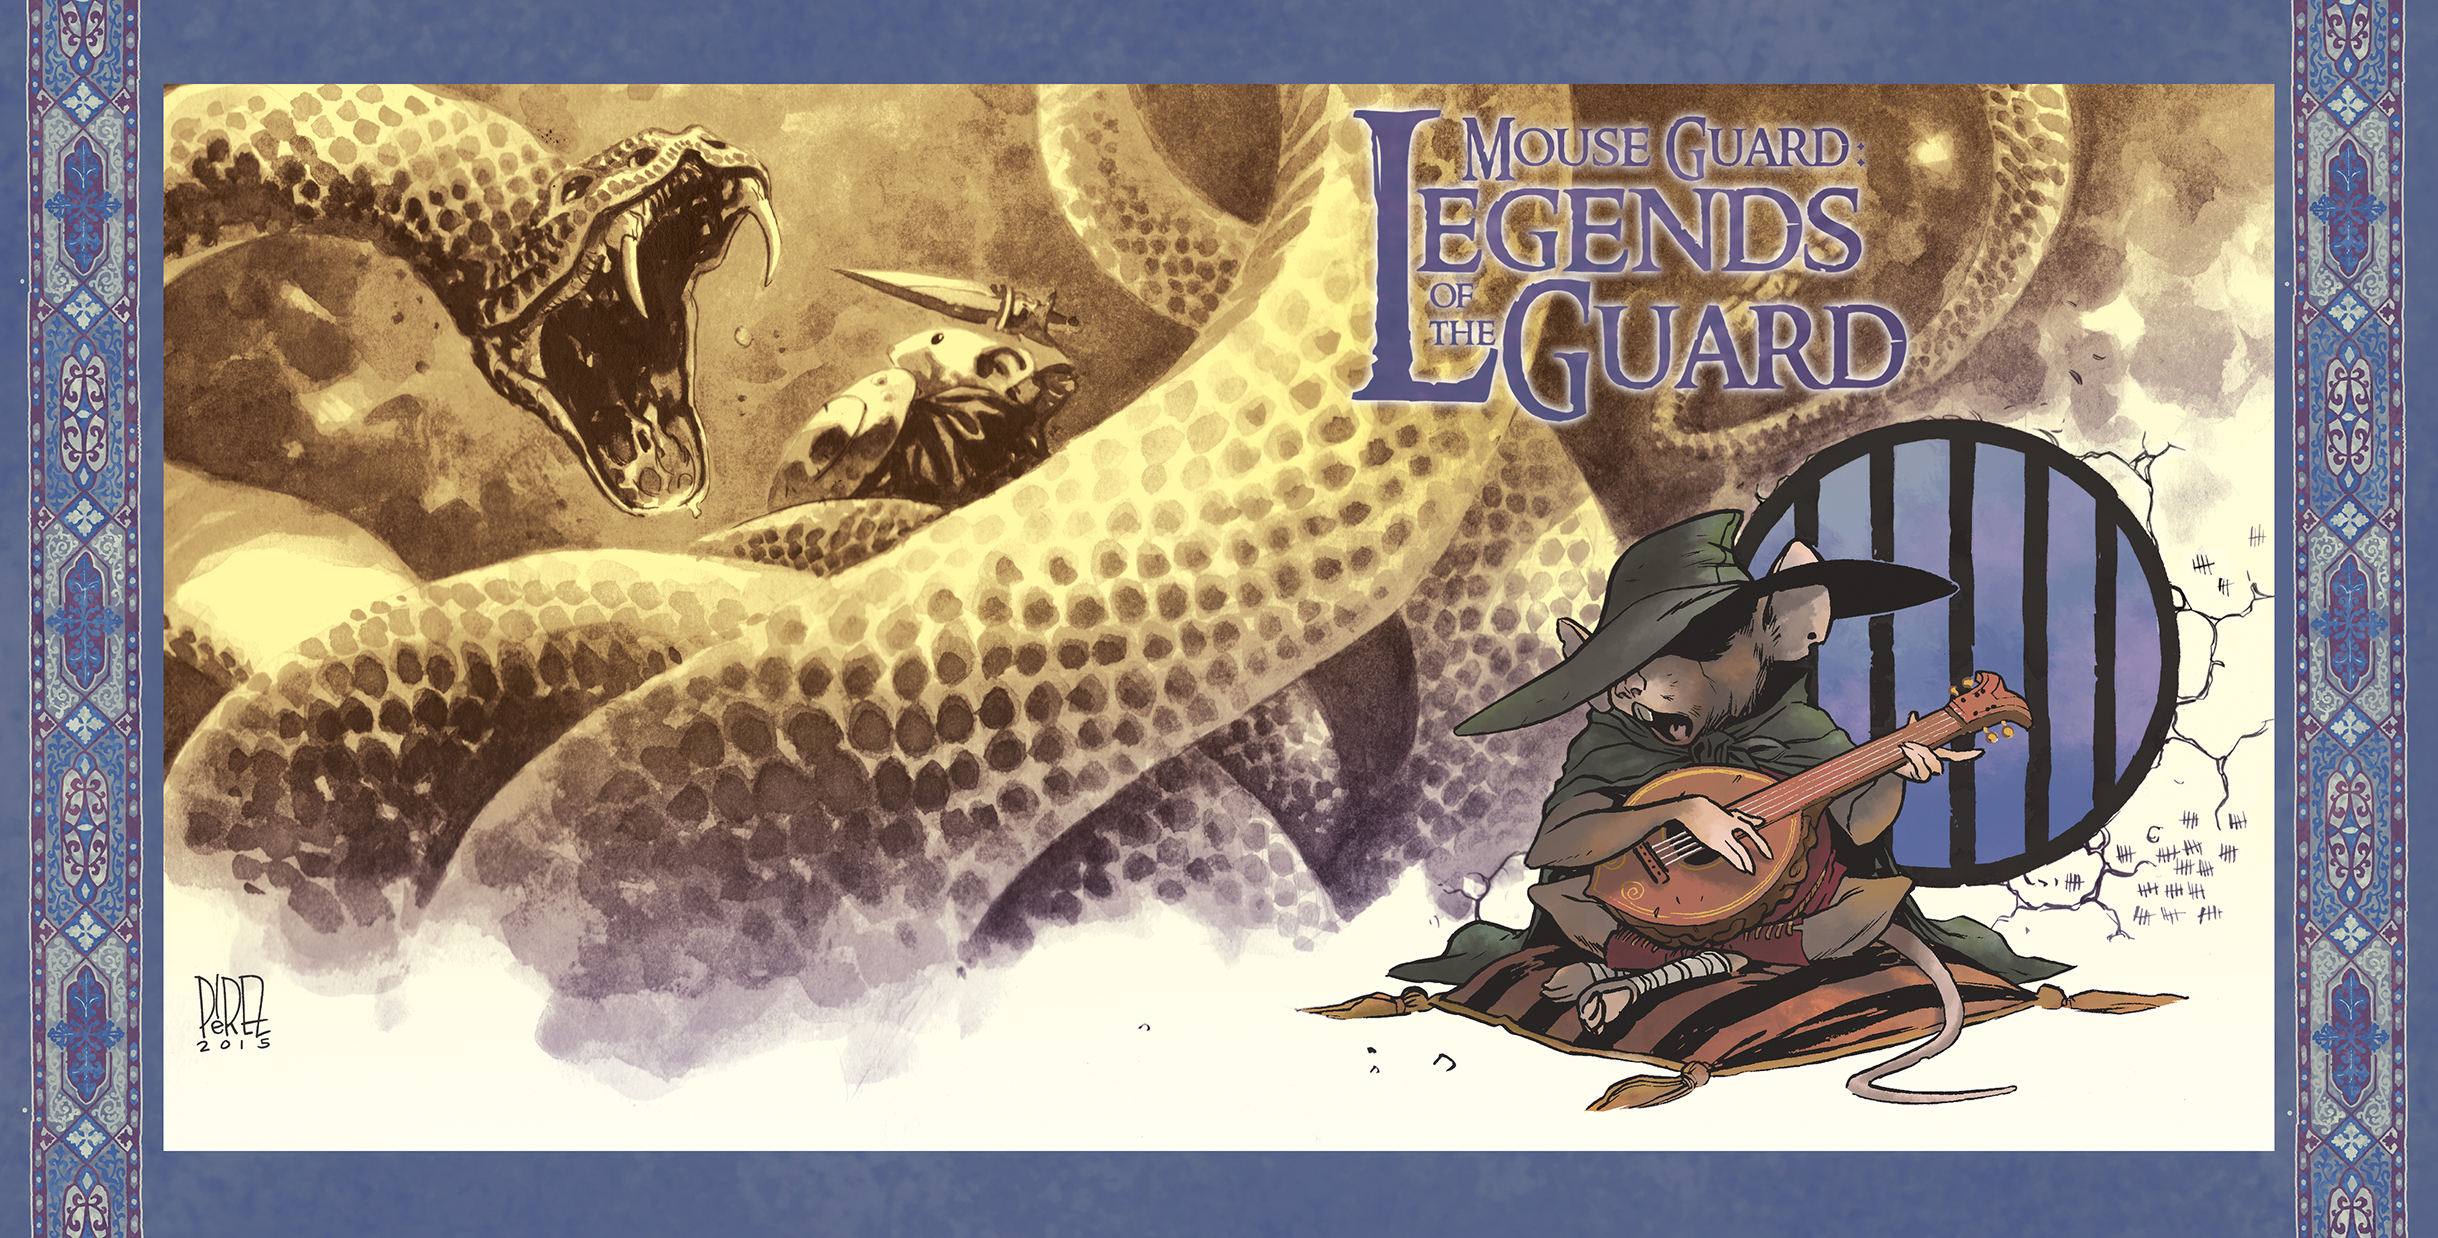 ARCHAIA_Legends_of_the_Guard_v3_001_B_10_Years_Variant